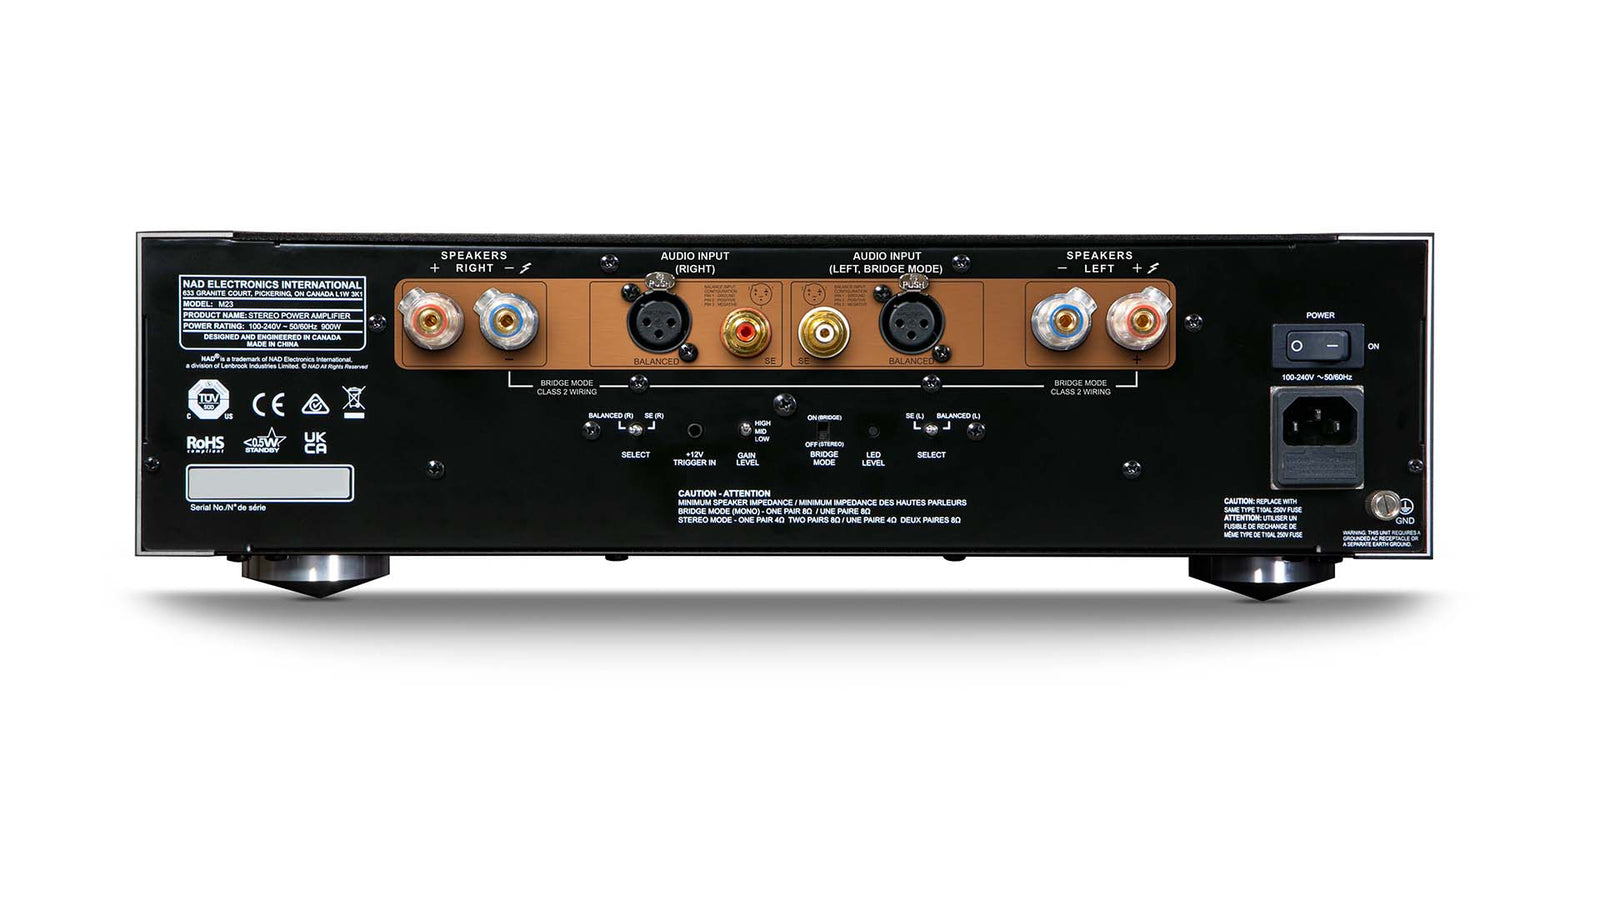 NAD M23 MASTER SERIES STEREO POWER AMPLIFIER - Best price on all NAD Electronics High Performance Hi-Fi and Home Theatre at Vinyl Sound, music and hi-fi apps including AV receivers, Music Streamers, Amplifiers models C 399 - C 700 - M10 V2 - C 316BEE V2 - C 368 - D 3045..., NAD Electronics Audio/Video components for Home Theatre products, Integrated Amplifiers C 700 NEW BluOS Streaming Amplifiers, NAD Electronics Masters Series…